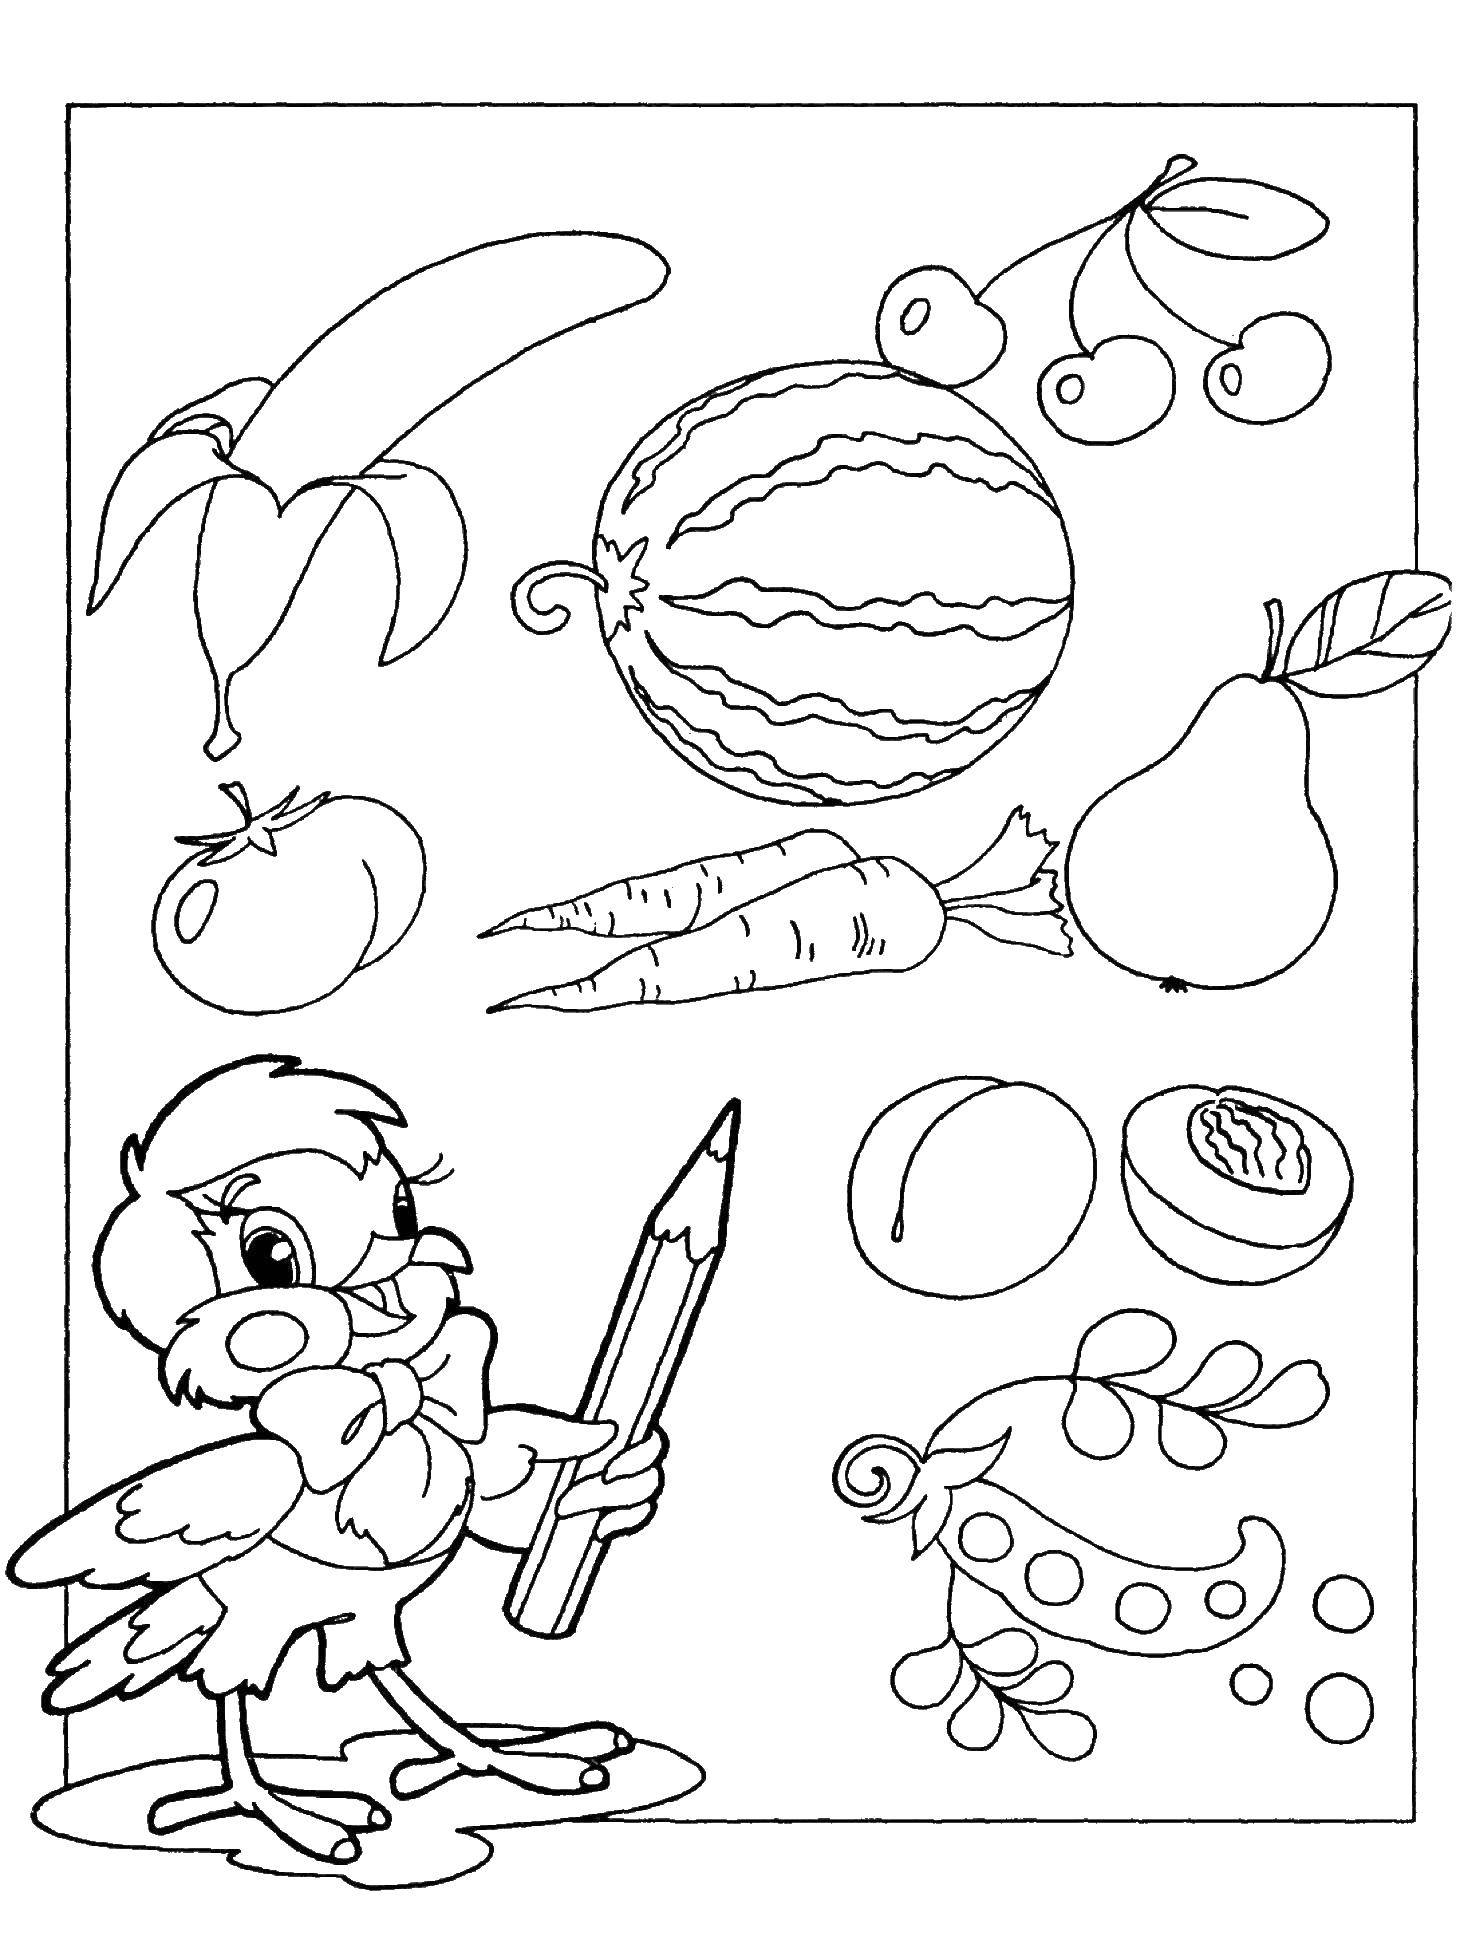 Coloring Help the bird to paint fruits and vegetables in the right color. Category Coloring pages for kids. Tags:  Vegetables, fruits, berries.